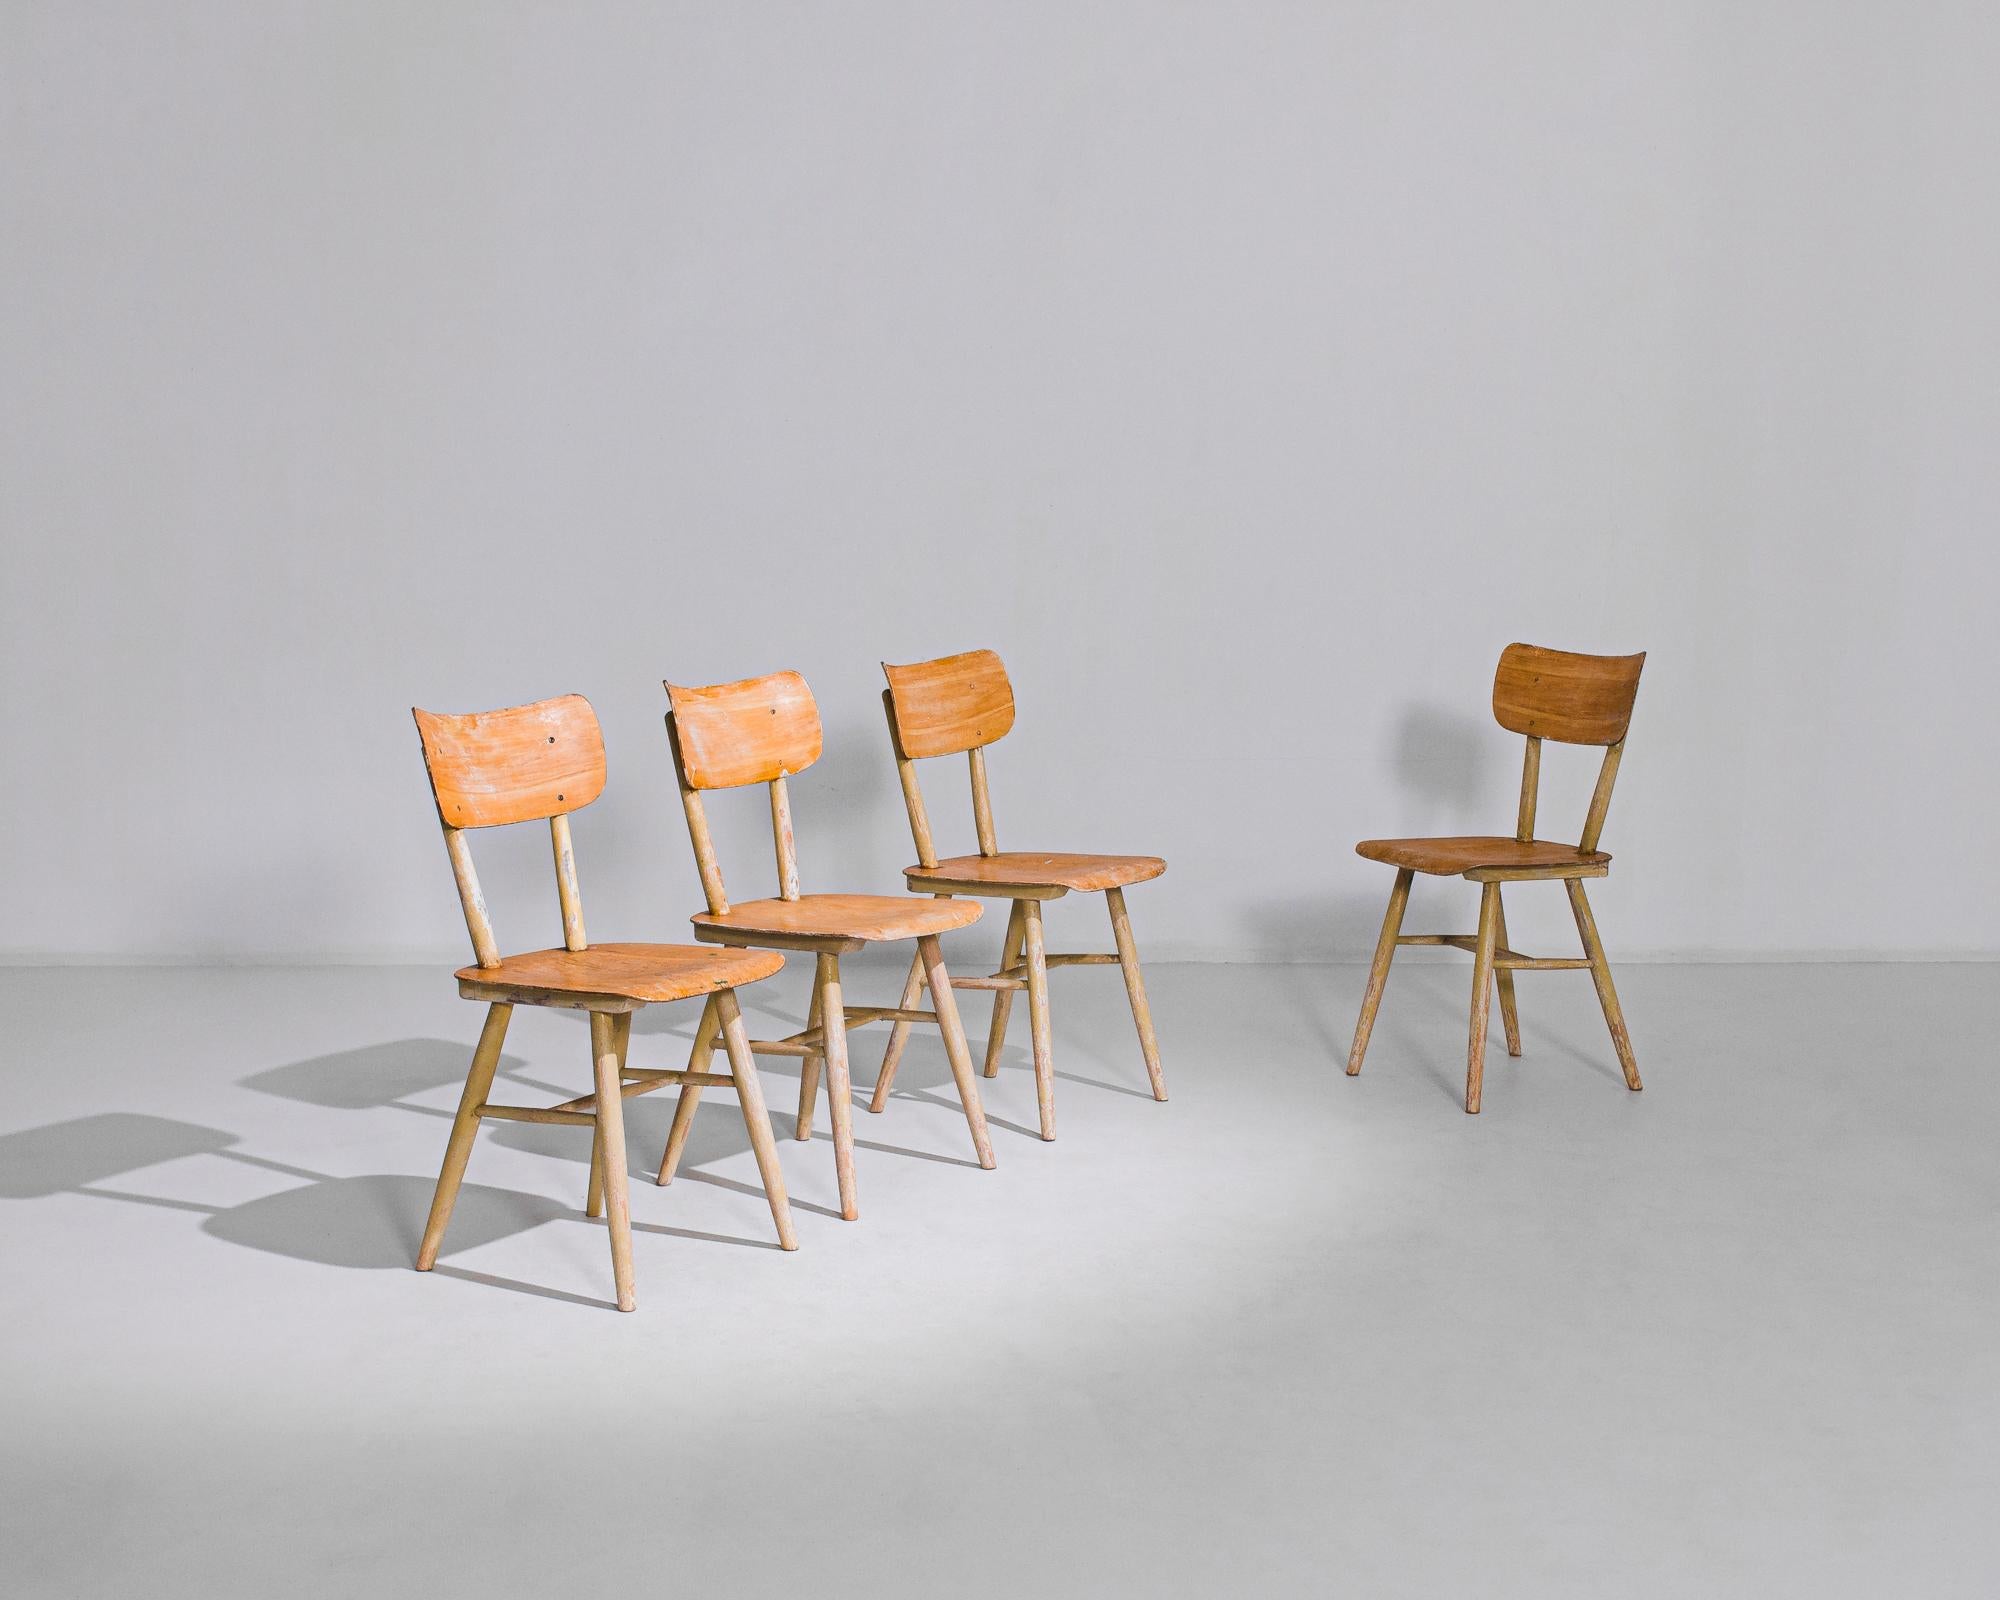 This set of four wooden dining chairs was made in Austria, circa 1950. They are manufactured by Thonet, famed for their invention of bentwood furniture in the mid-nineteenth century. The molded plywood seen in the seats and backs of these chairs is